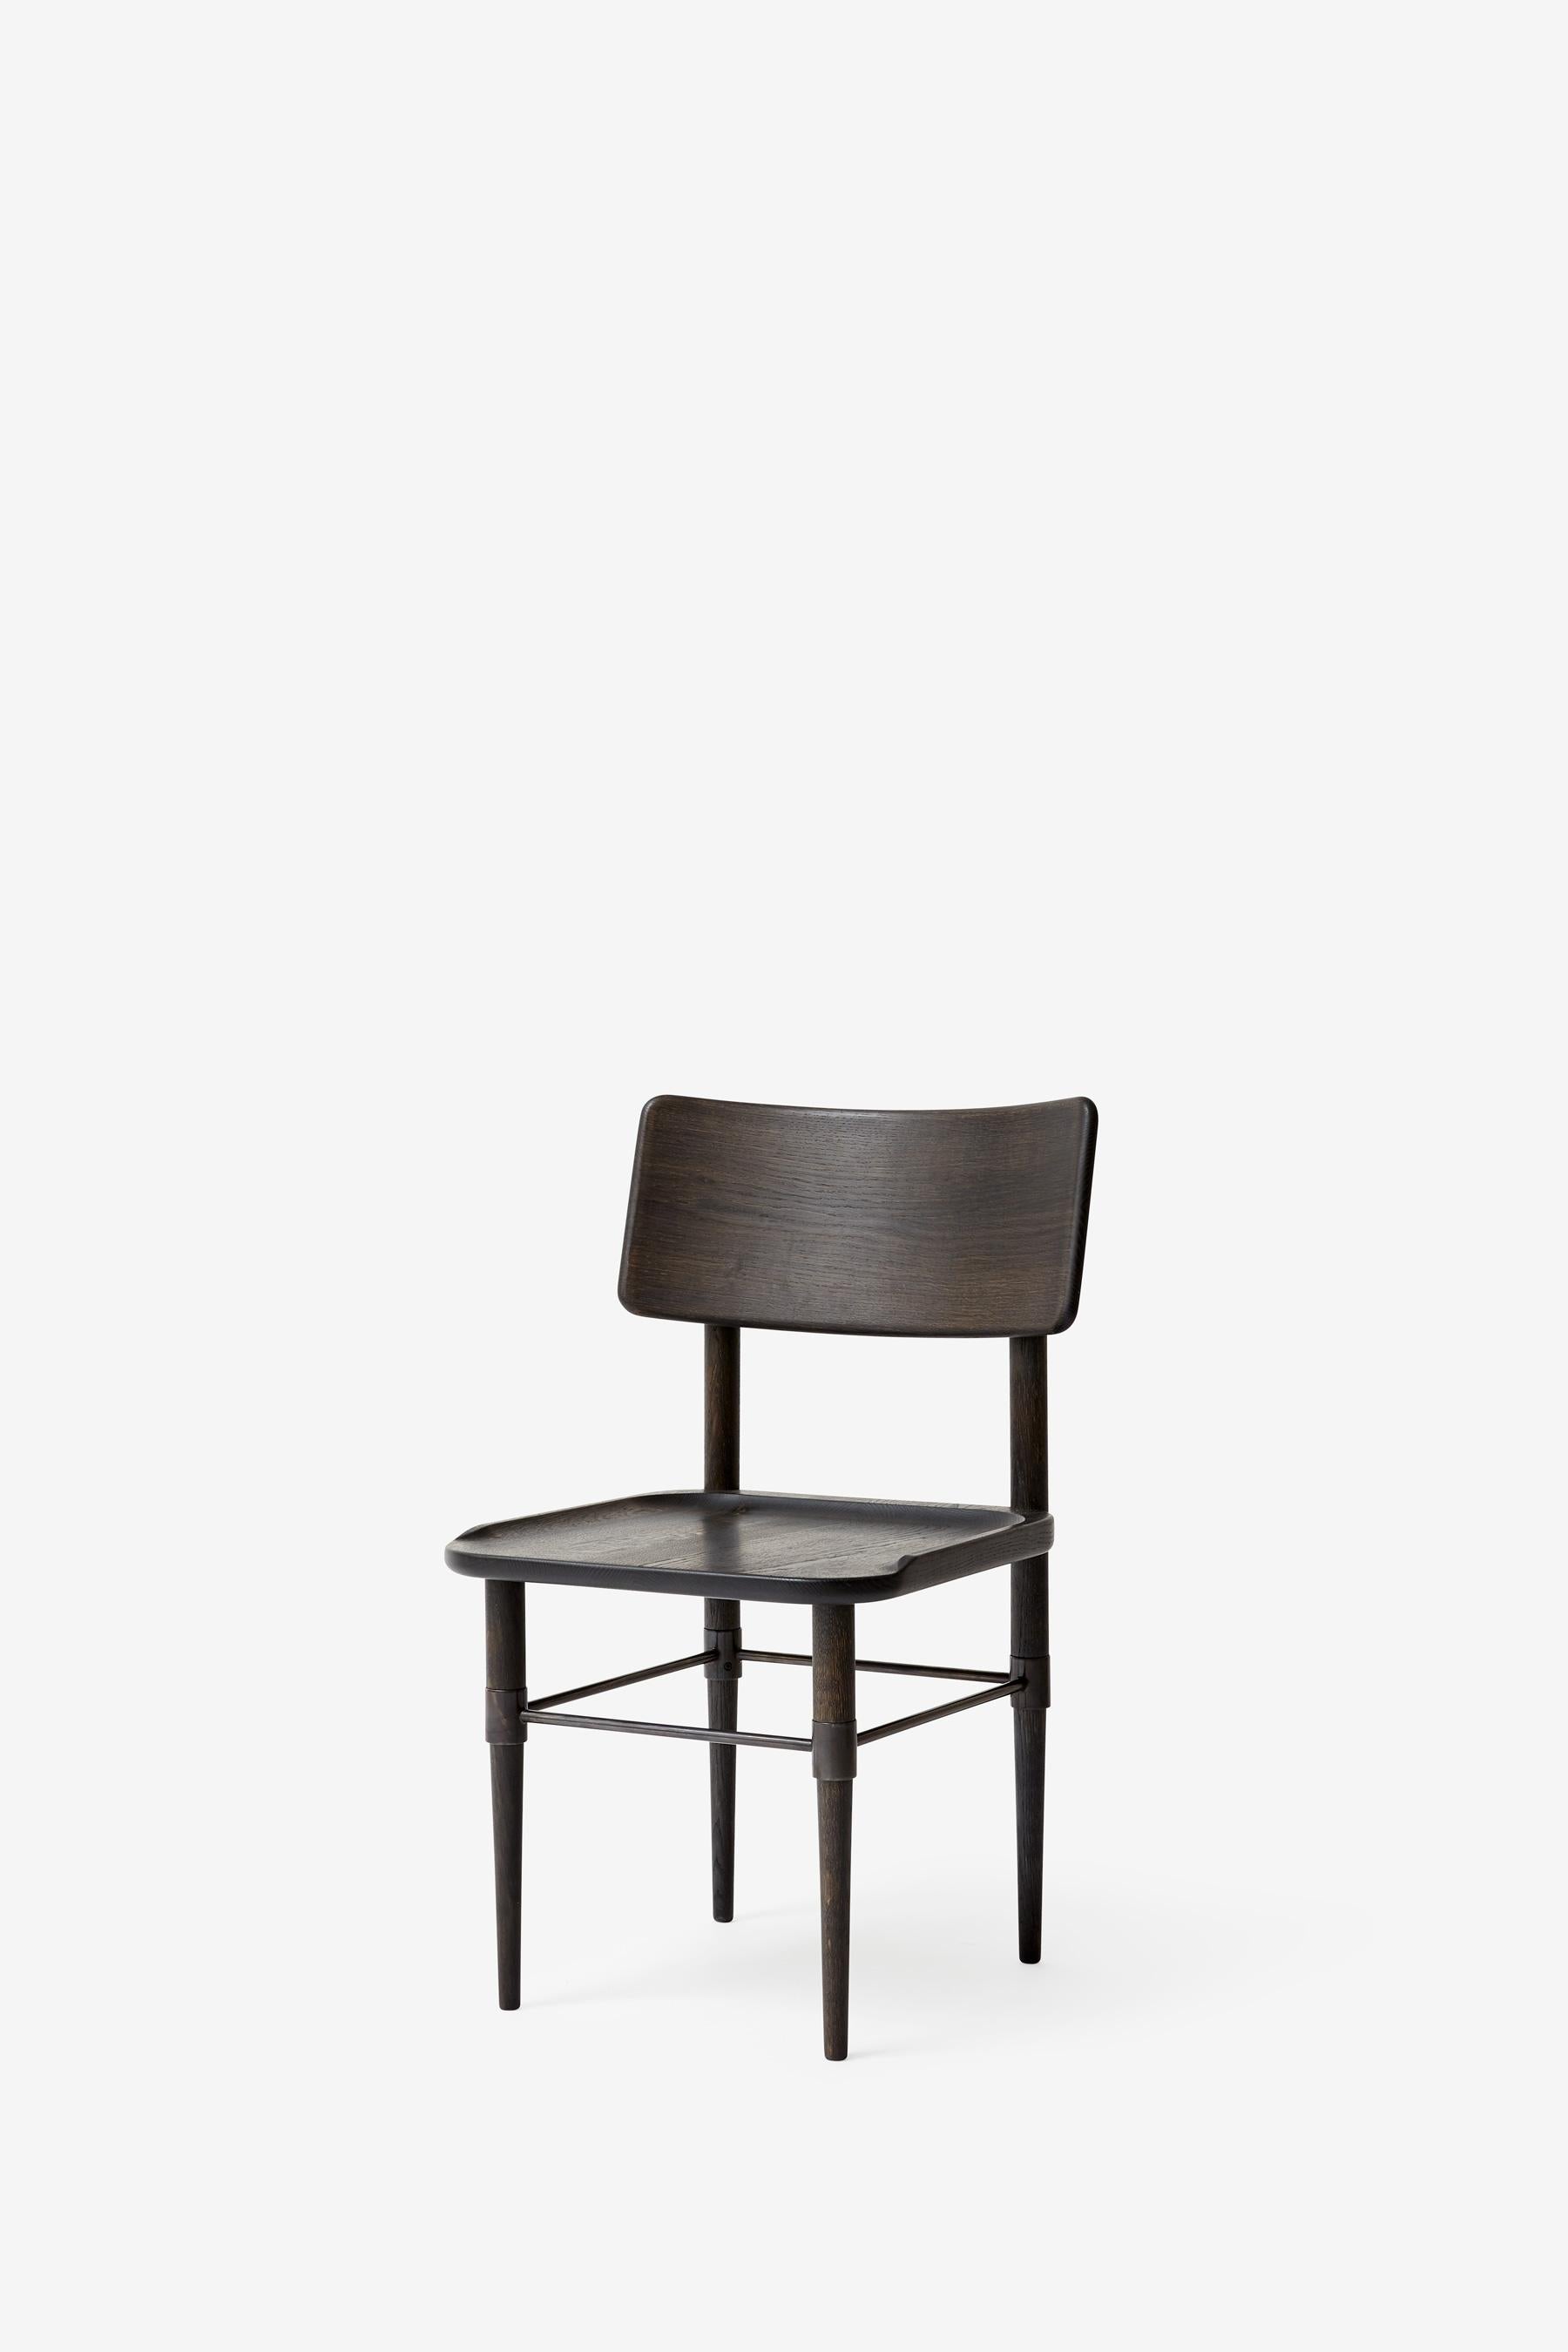 MG101 Dining chair in Dark Nature oak and blackened metal. The seat pad is not included and can be ordered separately.

The Holmen series originates in a series of furniture, which was developed for Michelin restaurant 108 in Copenhagen. The common